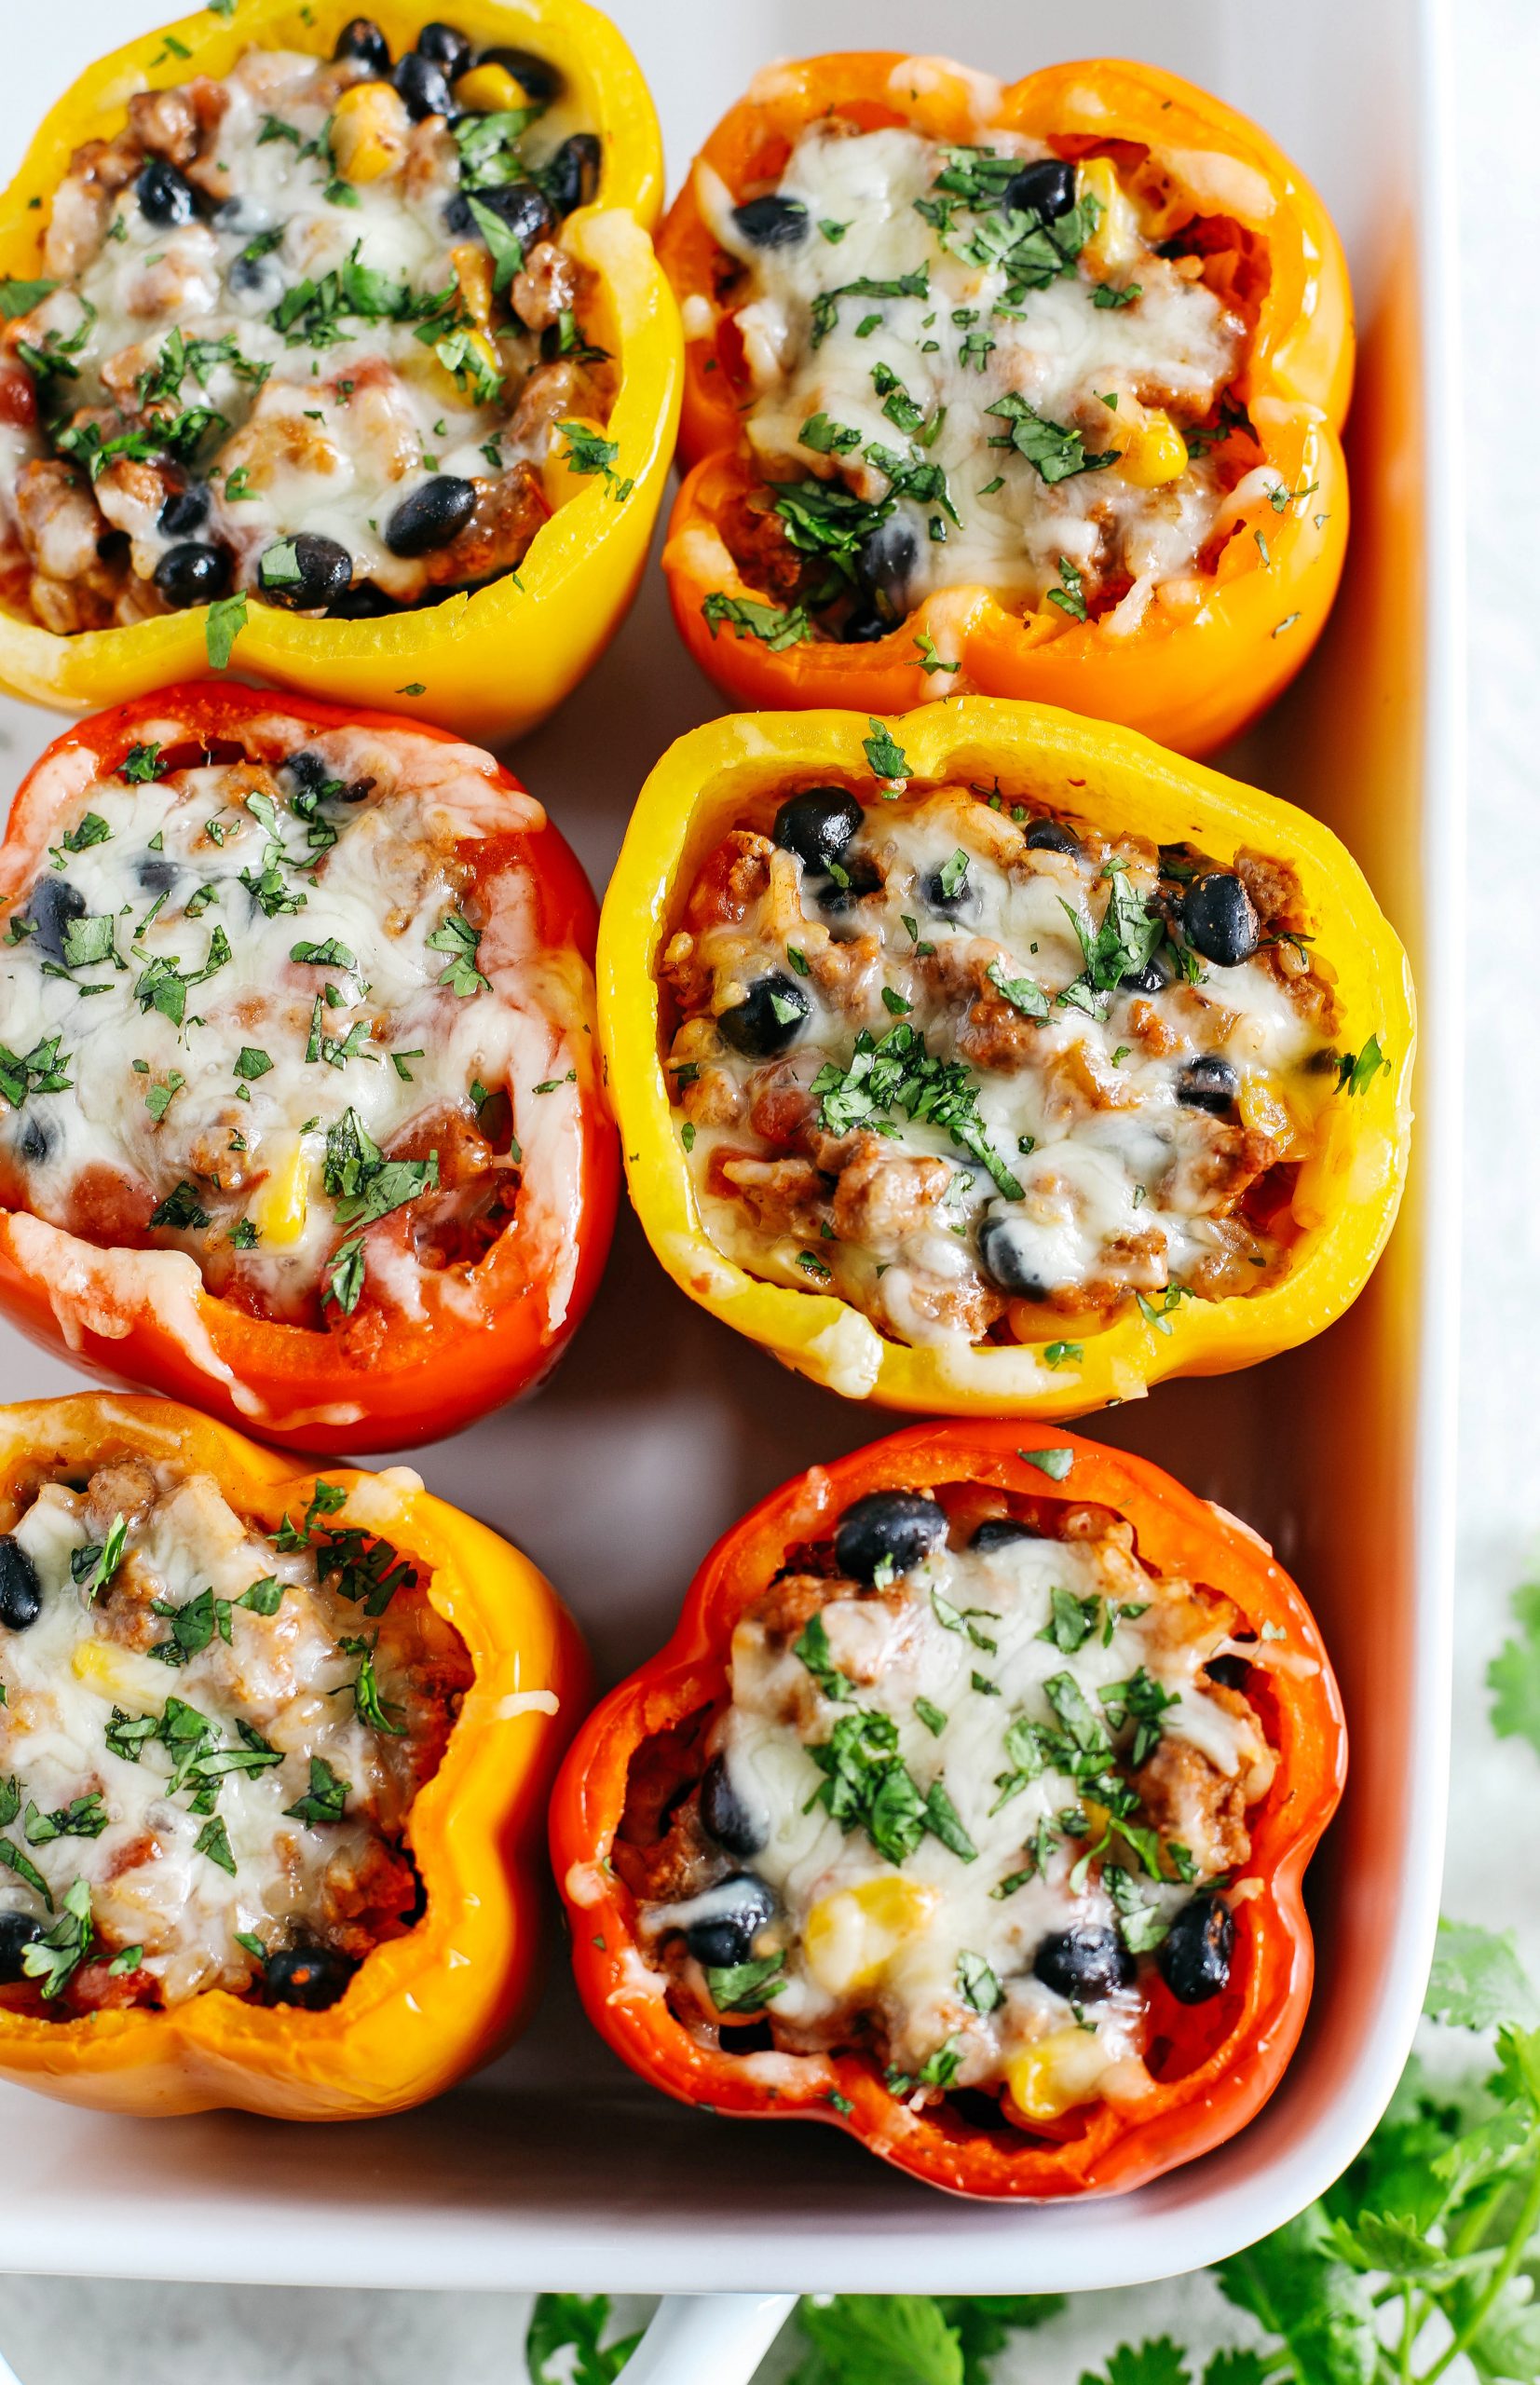 Light and healthy Mexican Stuffed Bell Peppers filled with seasoned ground turkey, brown rice, corn and black beans all topped with melted cheese!